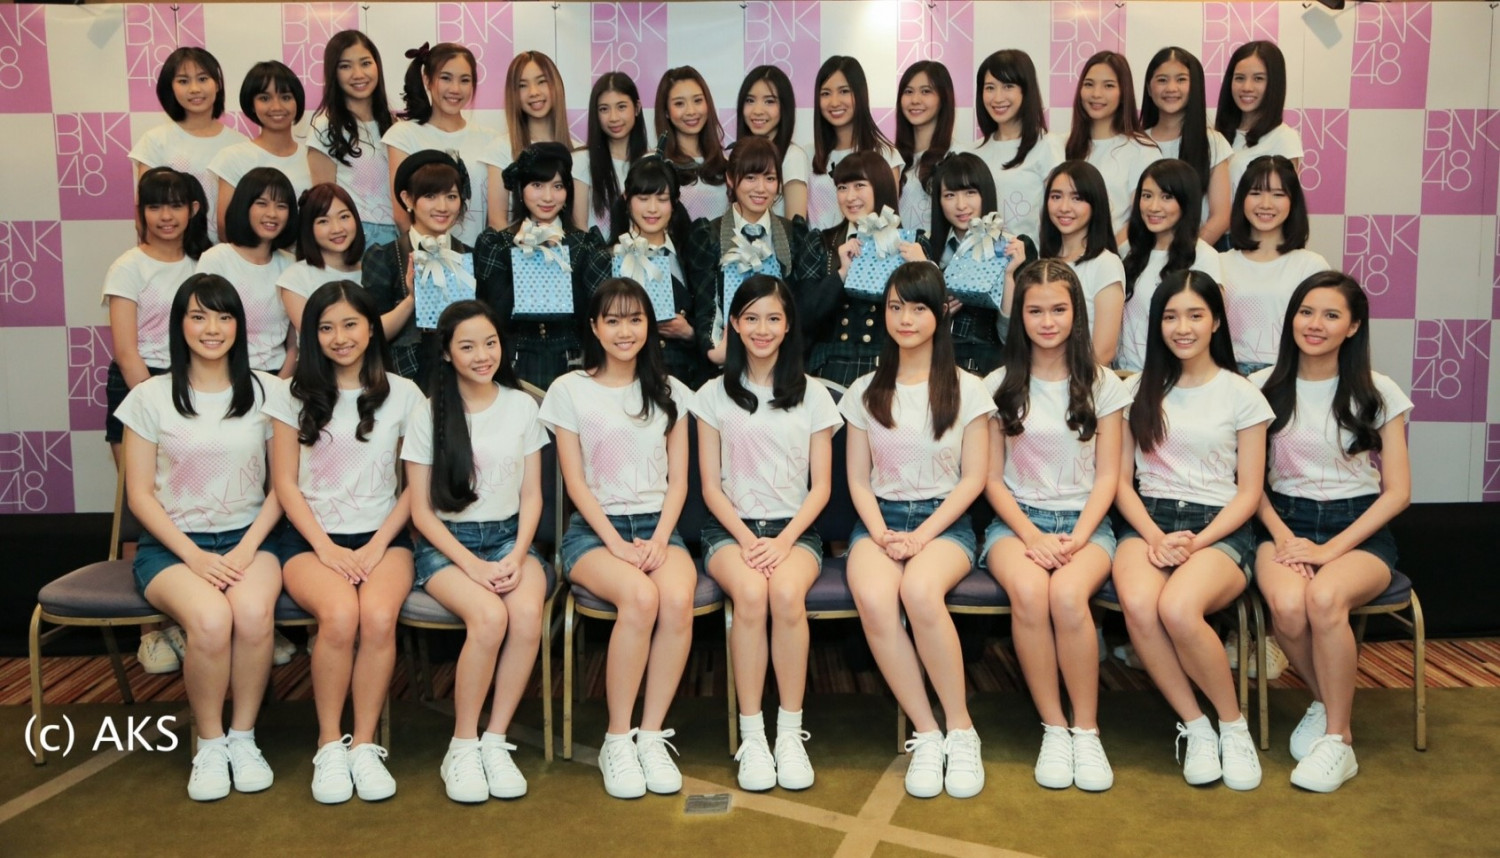 The 29 1st Generation Members of BNK48 Revealed at JAPAN EXPO THAILAND 2017!